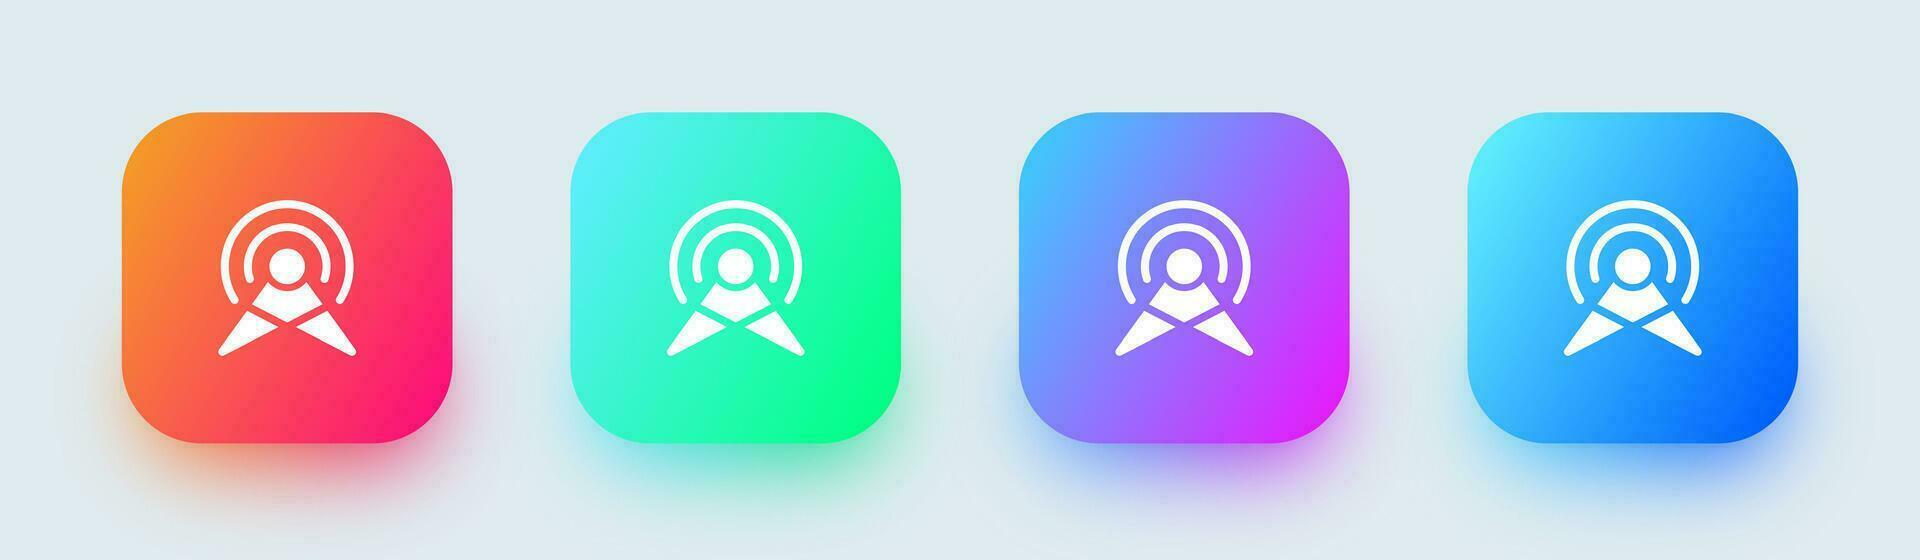 Broadcast solid icon in square gradient colors. Online signs vector illustration.